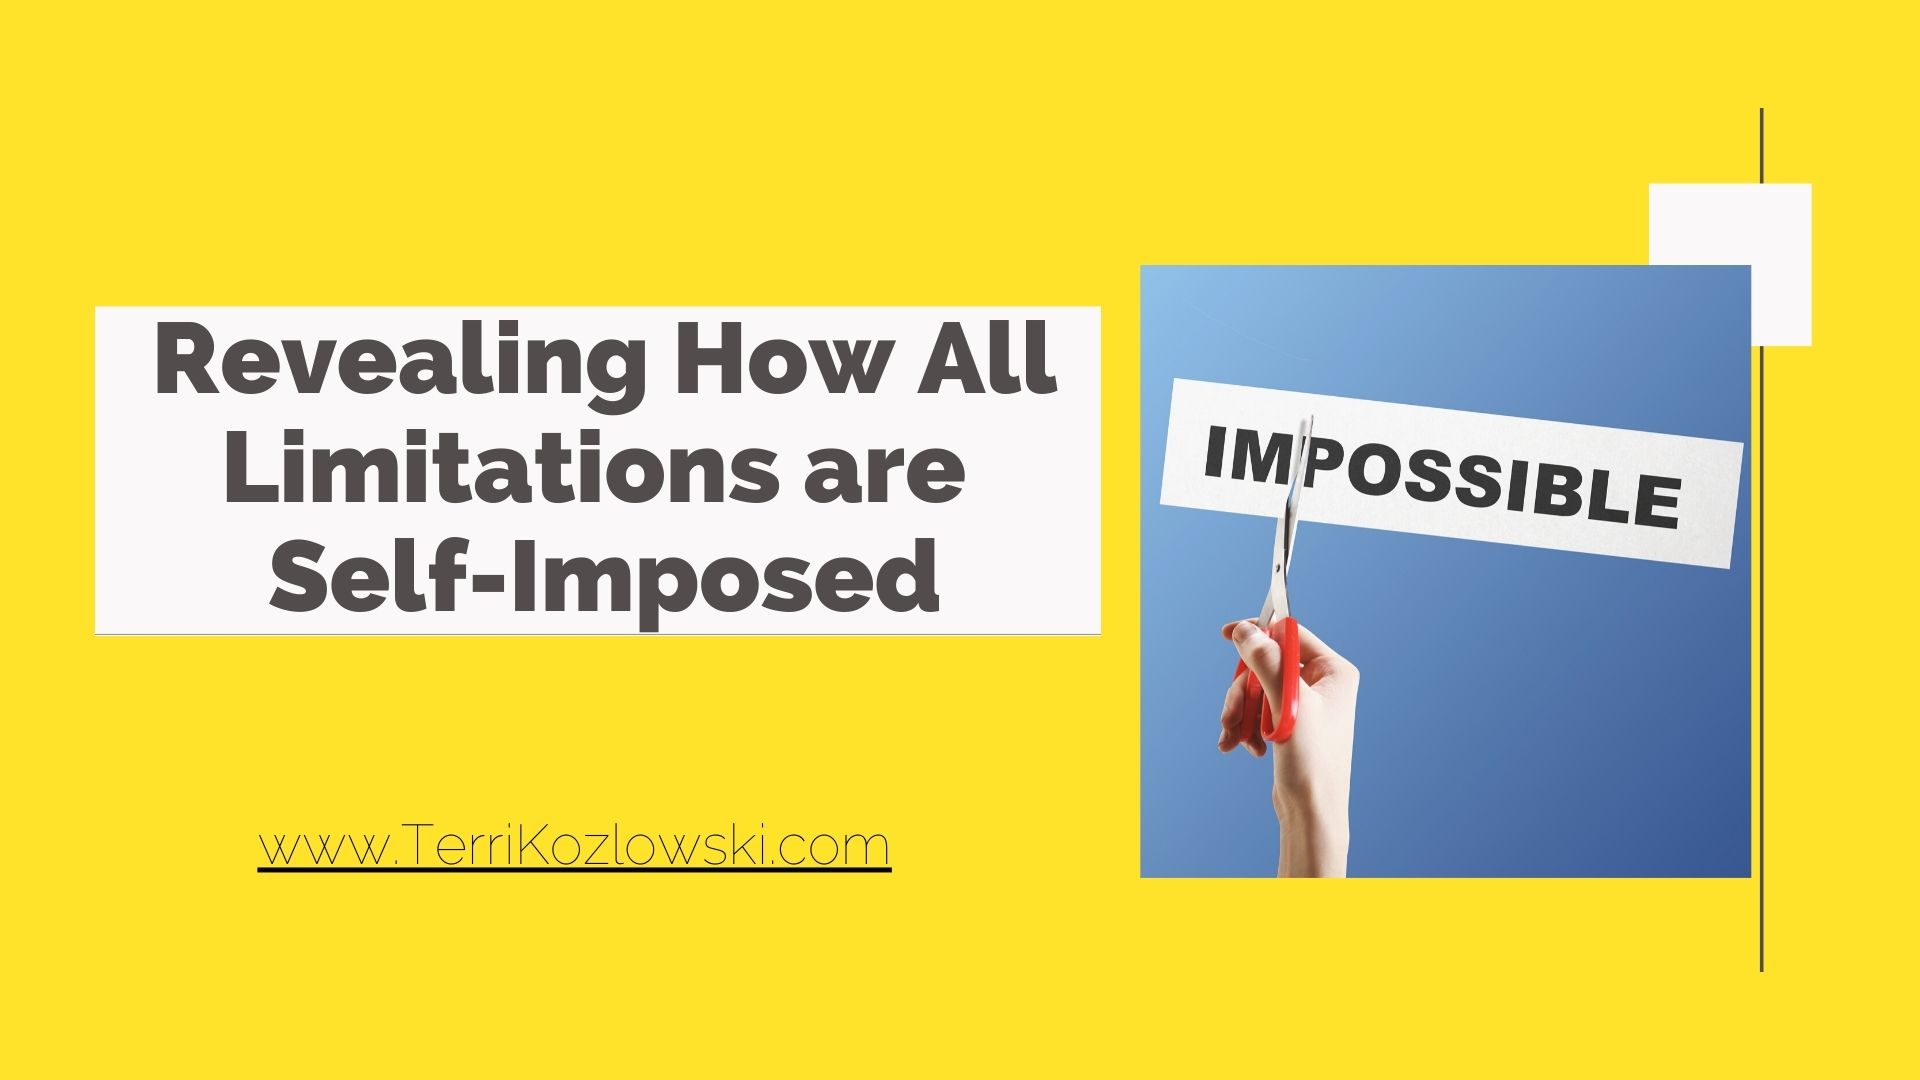 Revealing How All Limitations are Self-Imposed